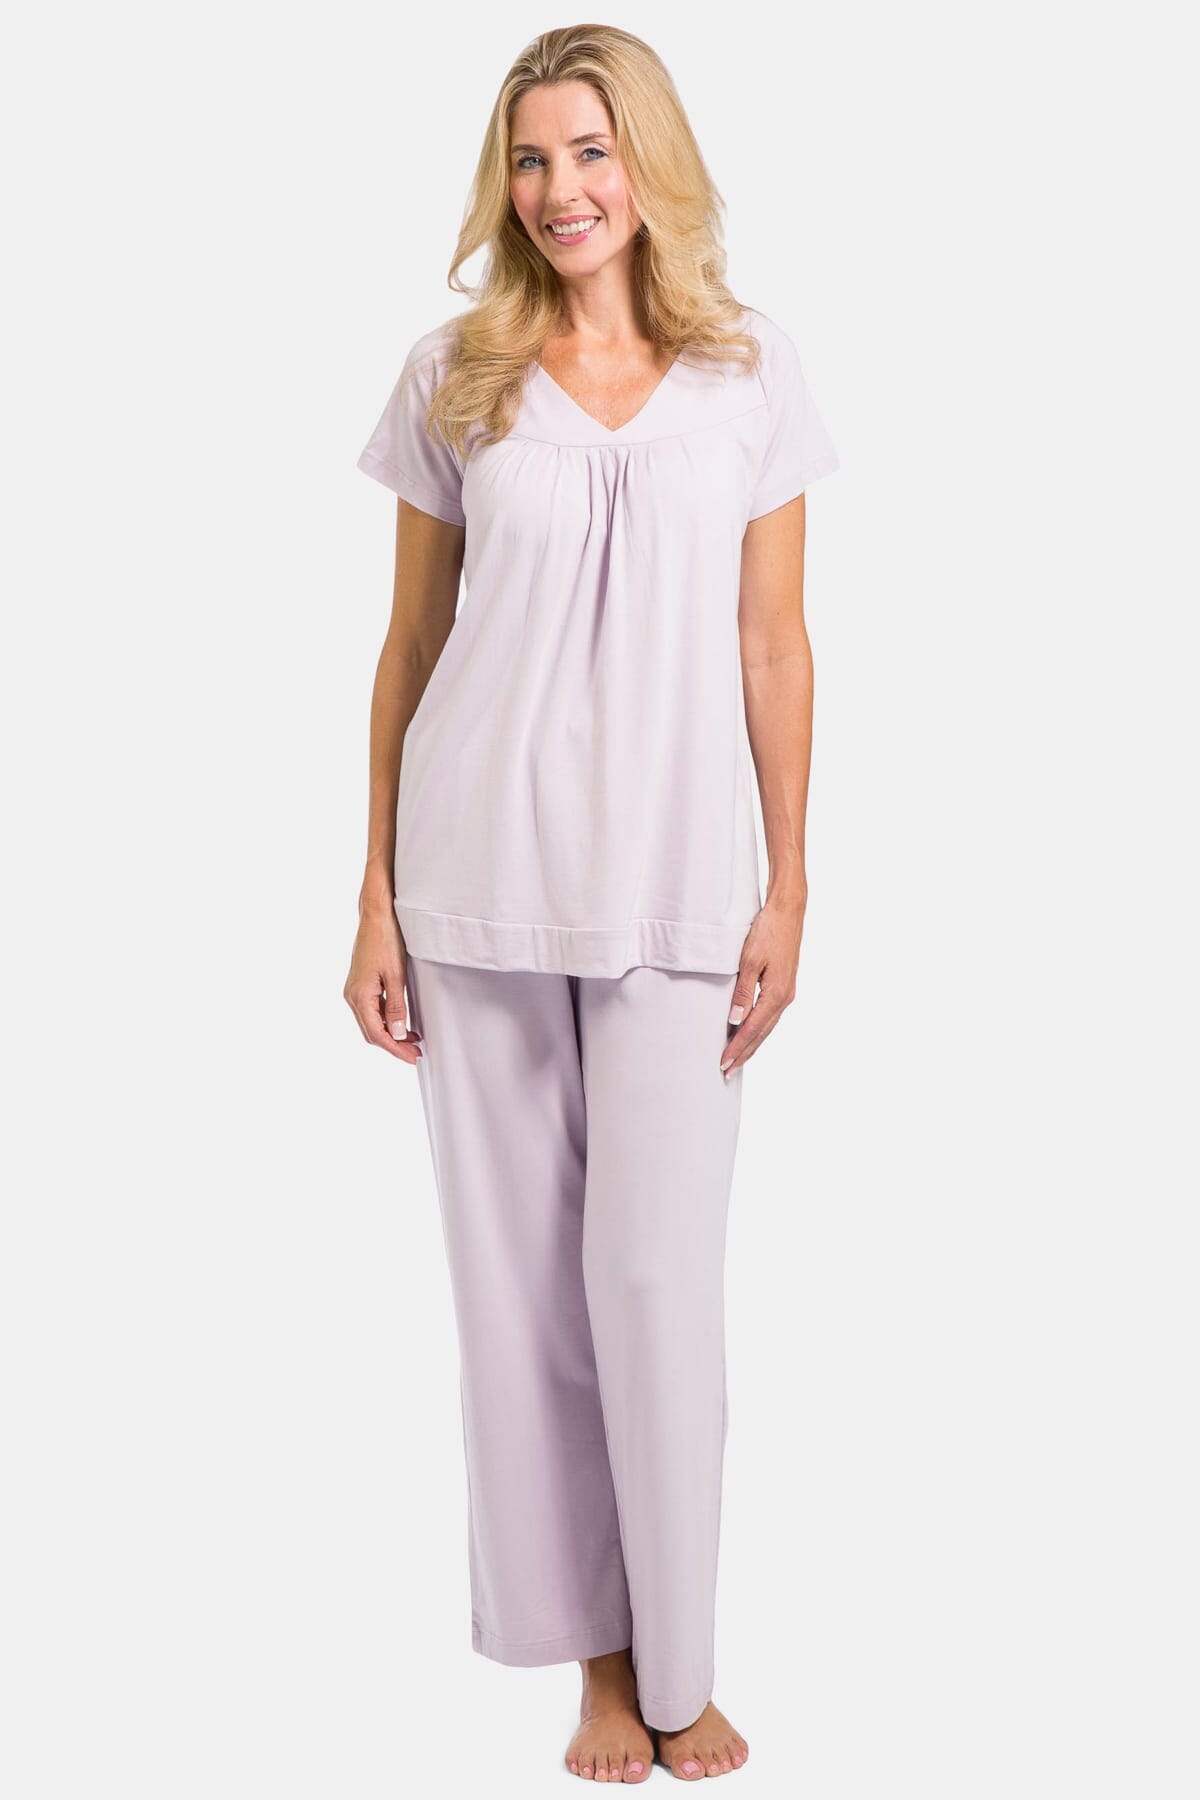 Women's Jersey Pajama Set with Gift Box- Short Sleeve Top and Full Length Pant Womens>Sleep and Lounge>Pajamas Fishers Finery Lavender Fog XS 